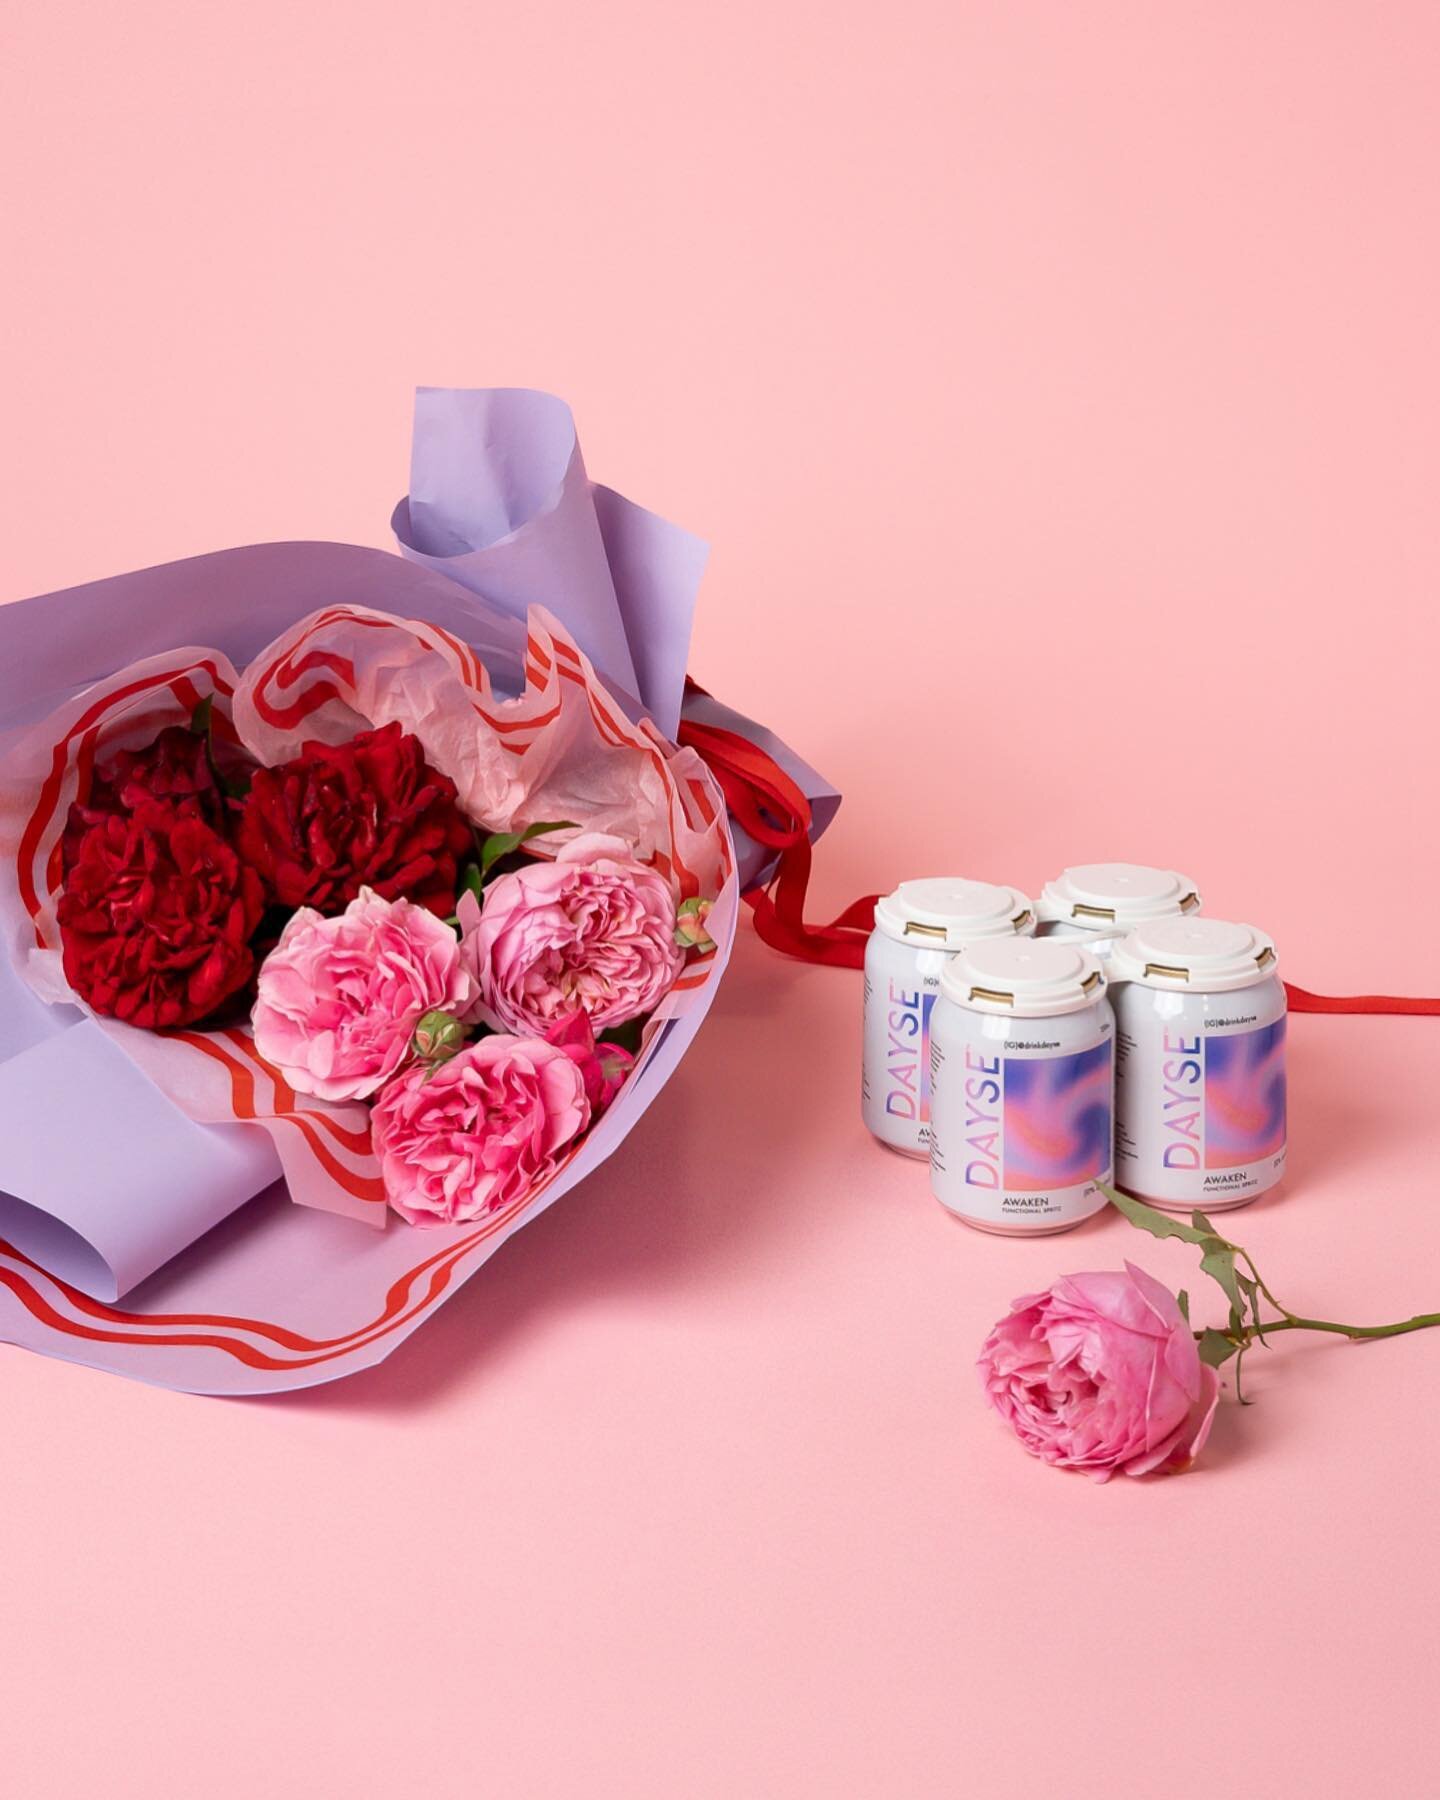 Cin cin🍹 Send your fav roses and a cocktail or mocktail this v-day. It&rsquo;s your choice:
🍹All buzz no booze with 4 pack of @drinkdayse functional spritzers 
OR 
🍹A floral treat with our ready to pour @maybesammycocktails cocktail line up. Fun! 